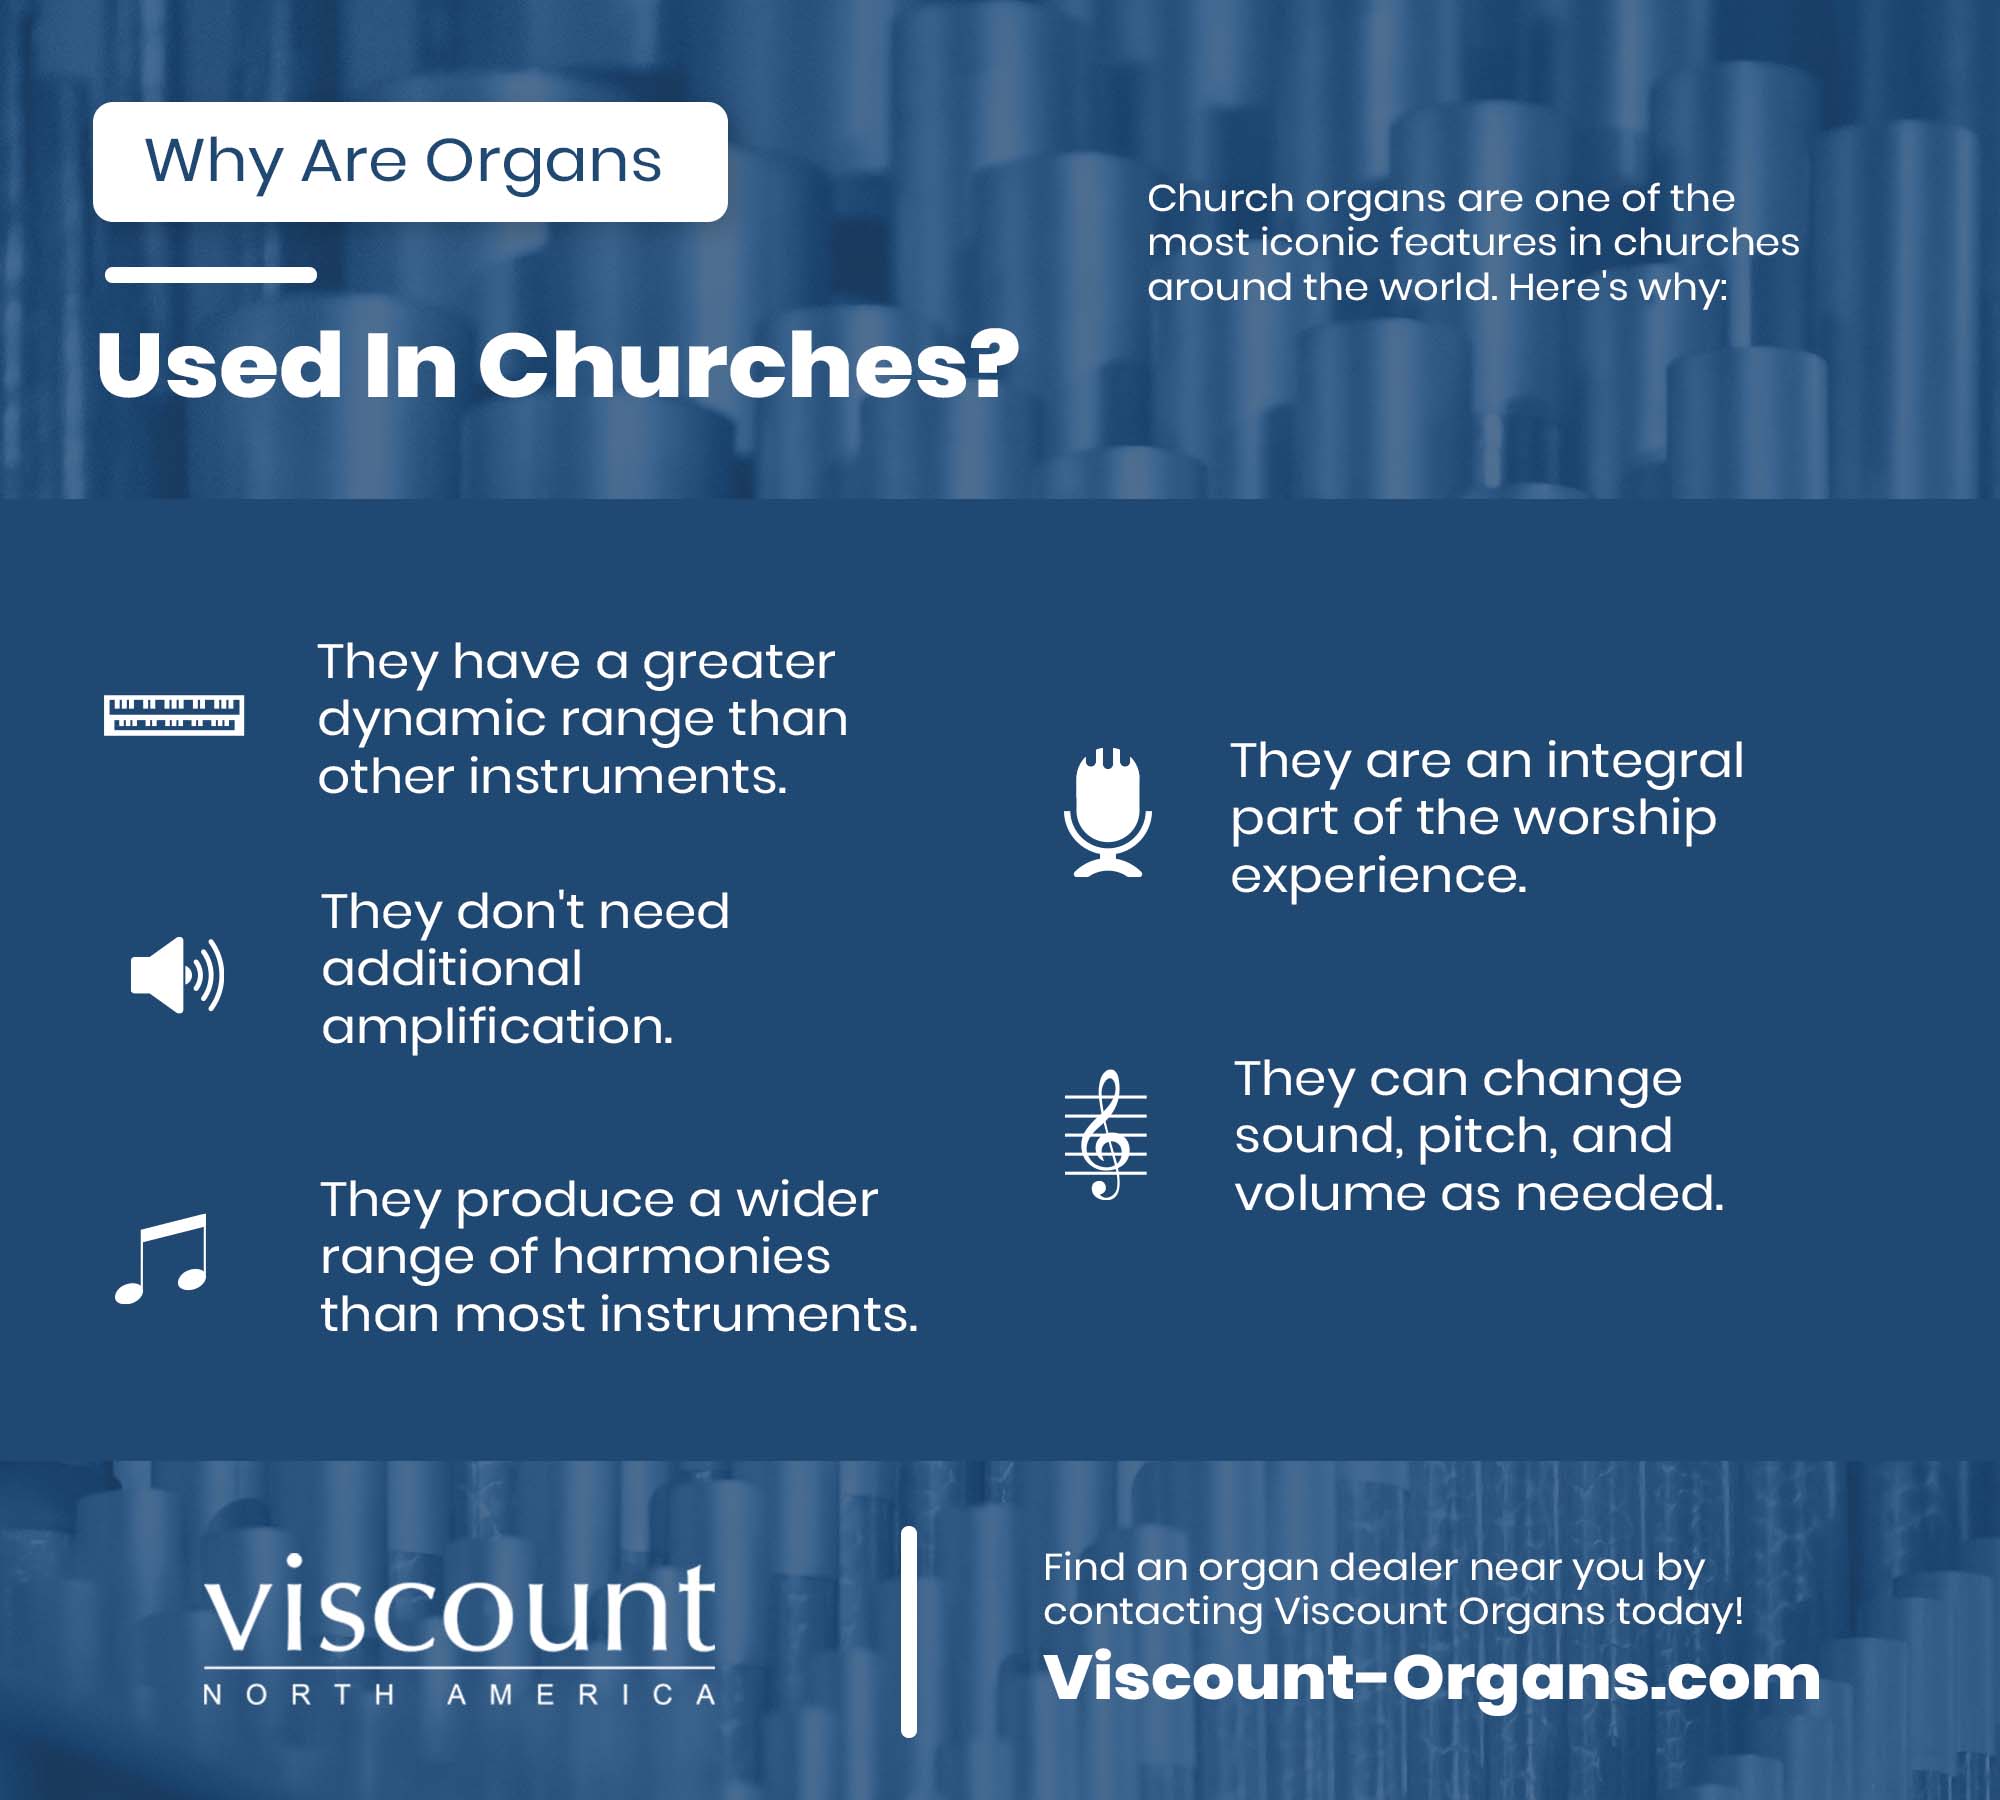 Why Are Organs Used in Churches Infographic